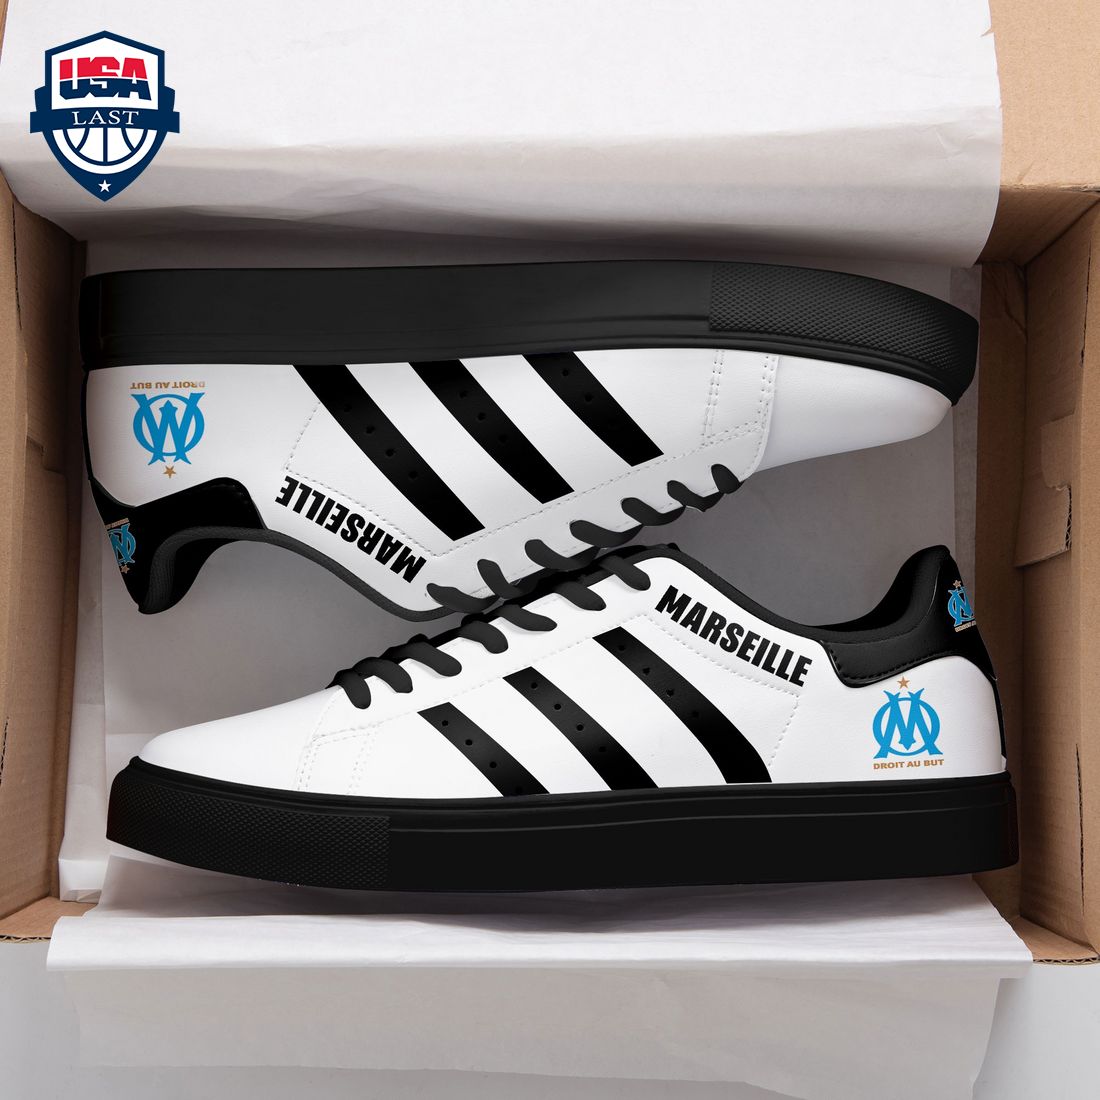 olympique-marseille-black-stripes-stan-smith-low-top-shoes-1-Fnhbe.jpg